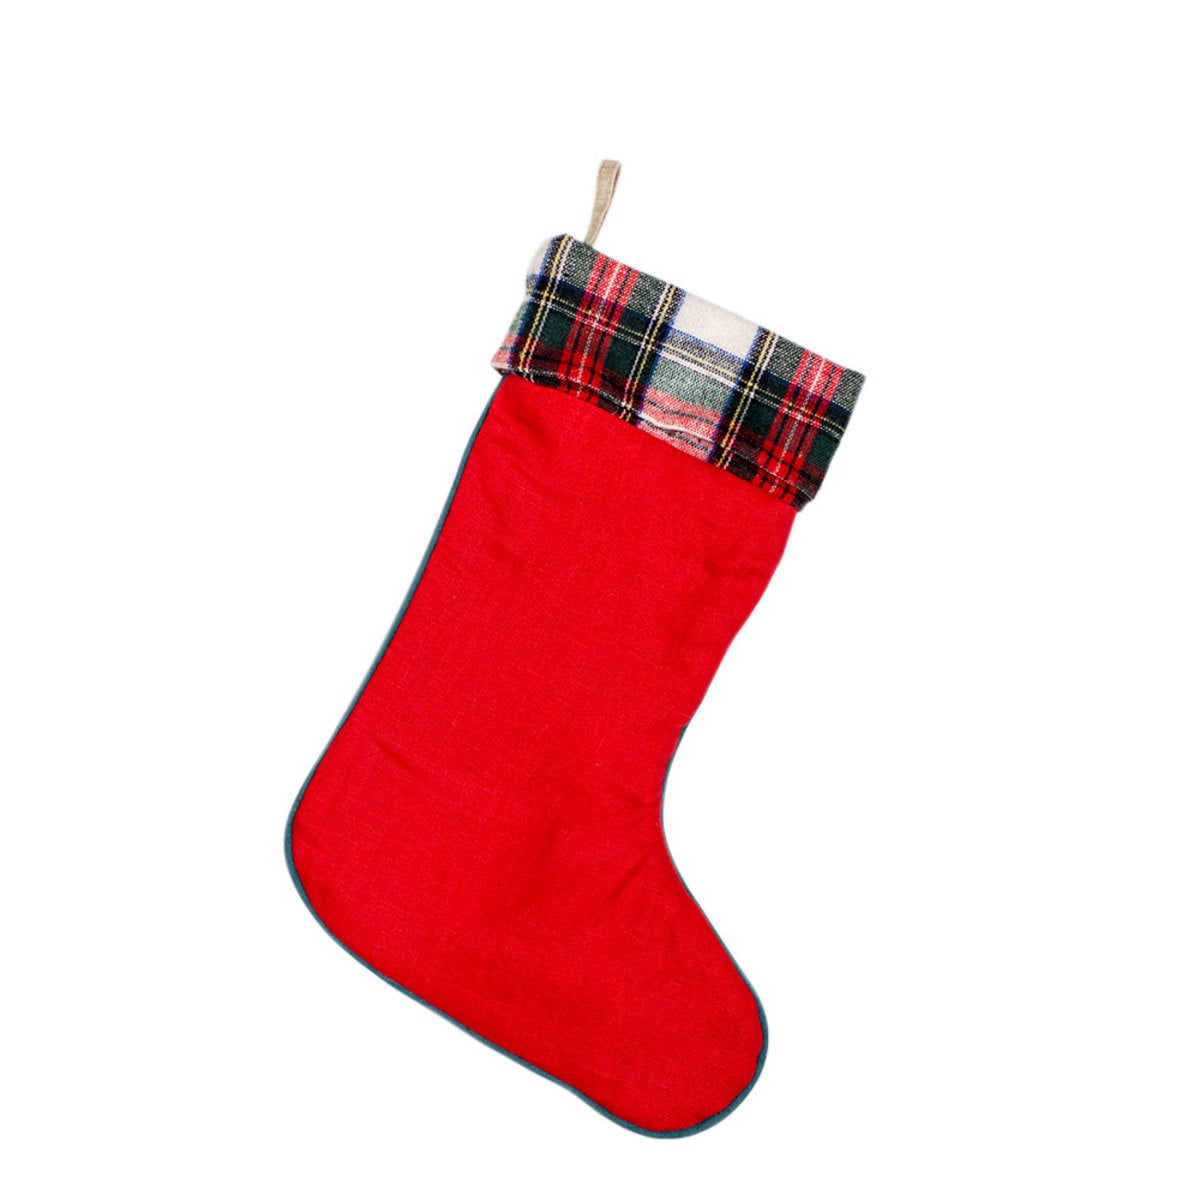 Red Lined Christmas Stocking with Plaid Cuff